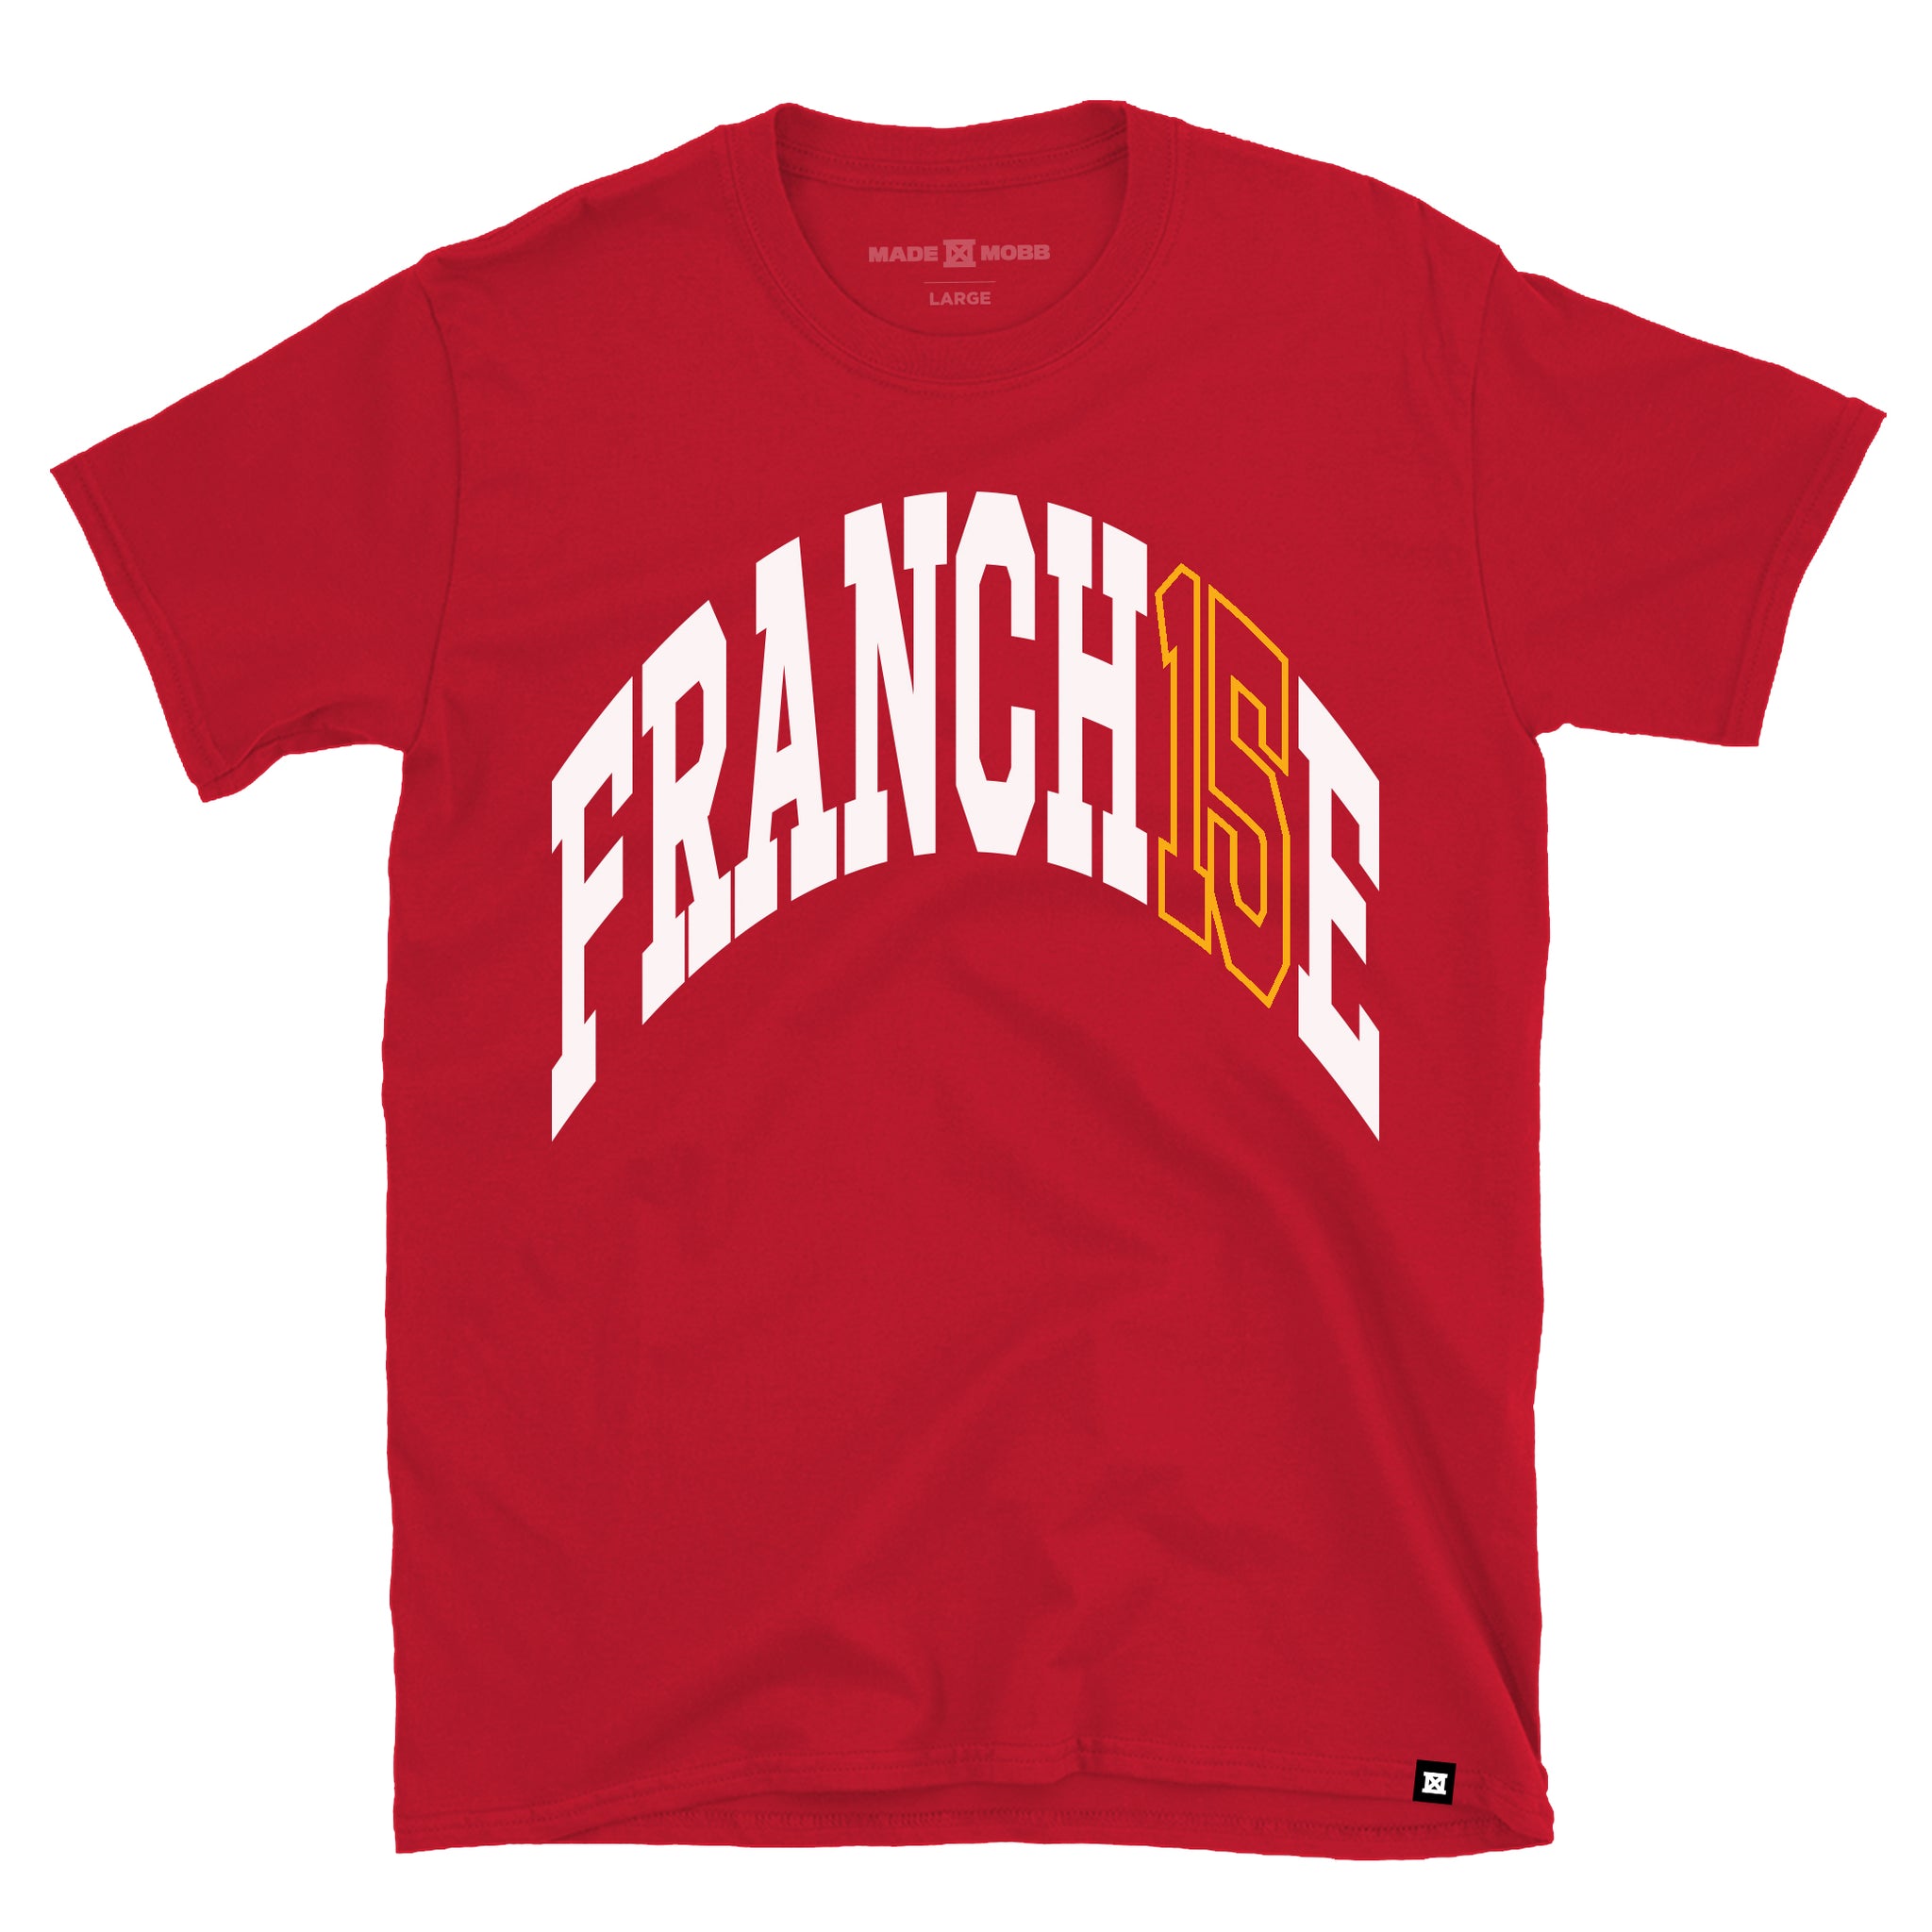 FRANCH15E Tee - Red